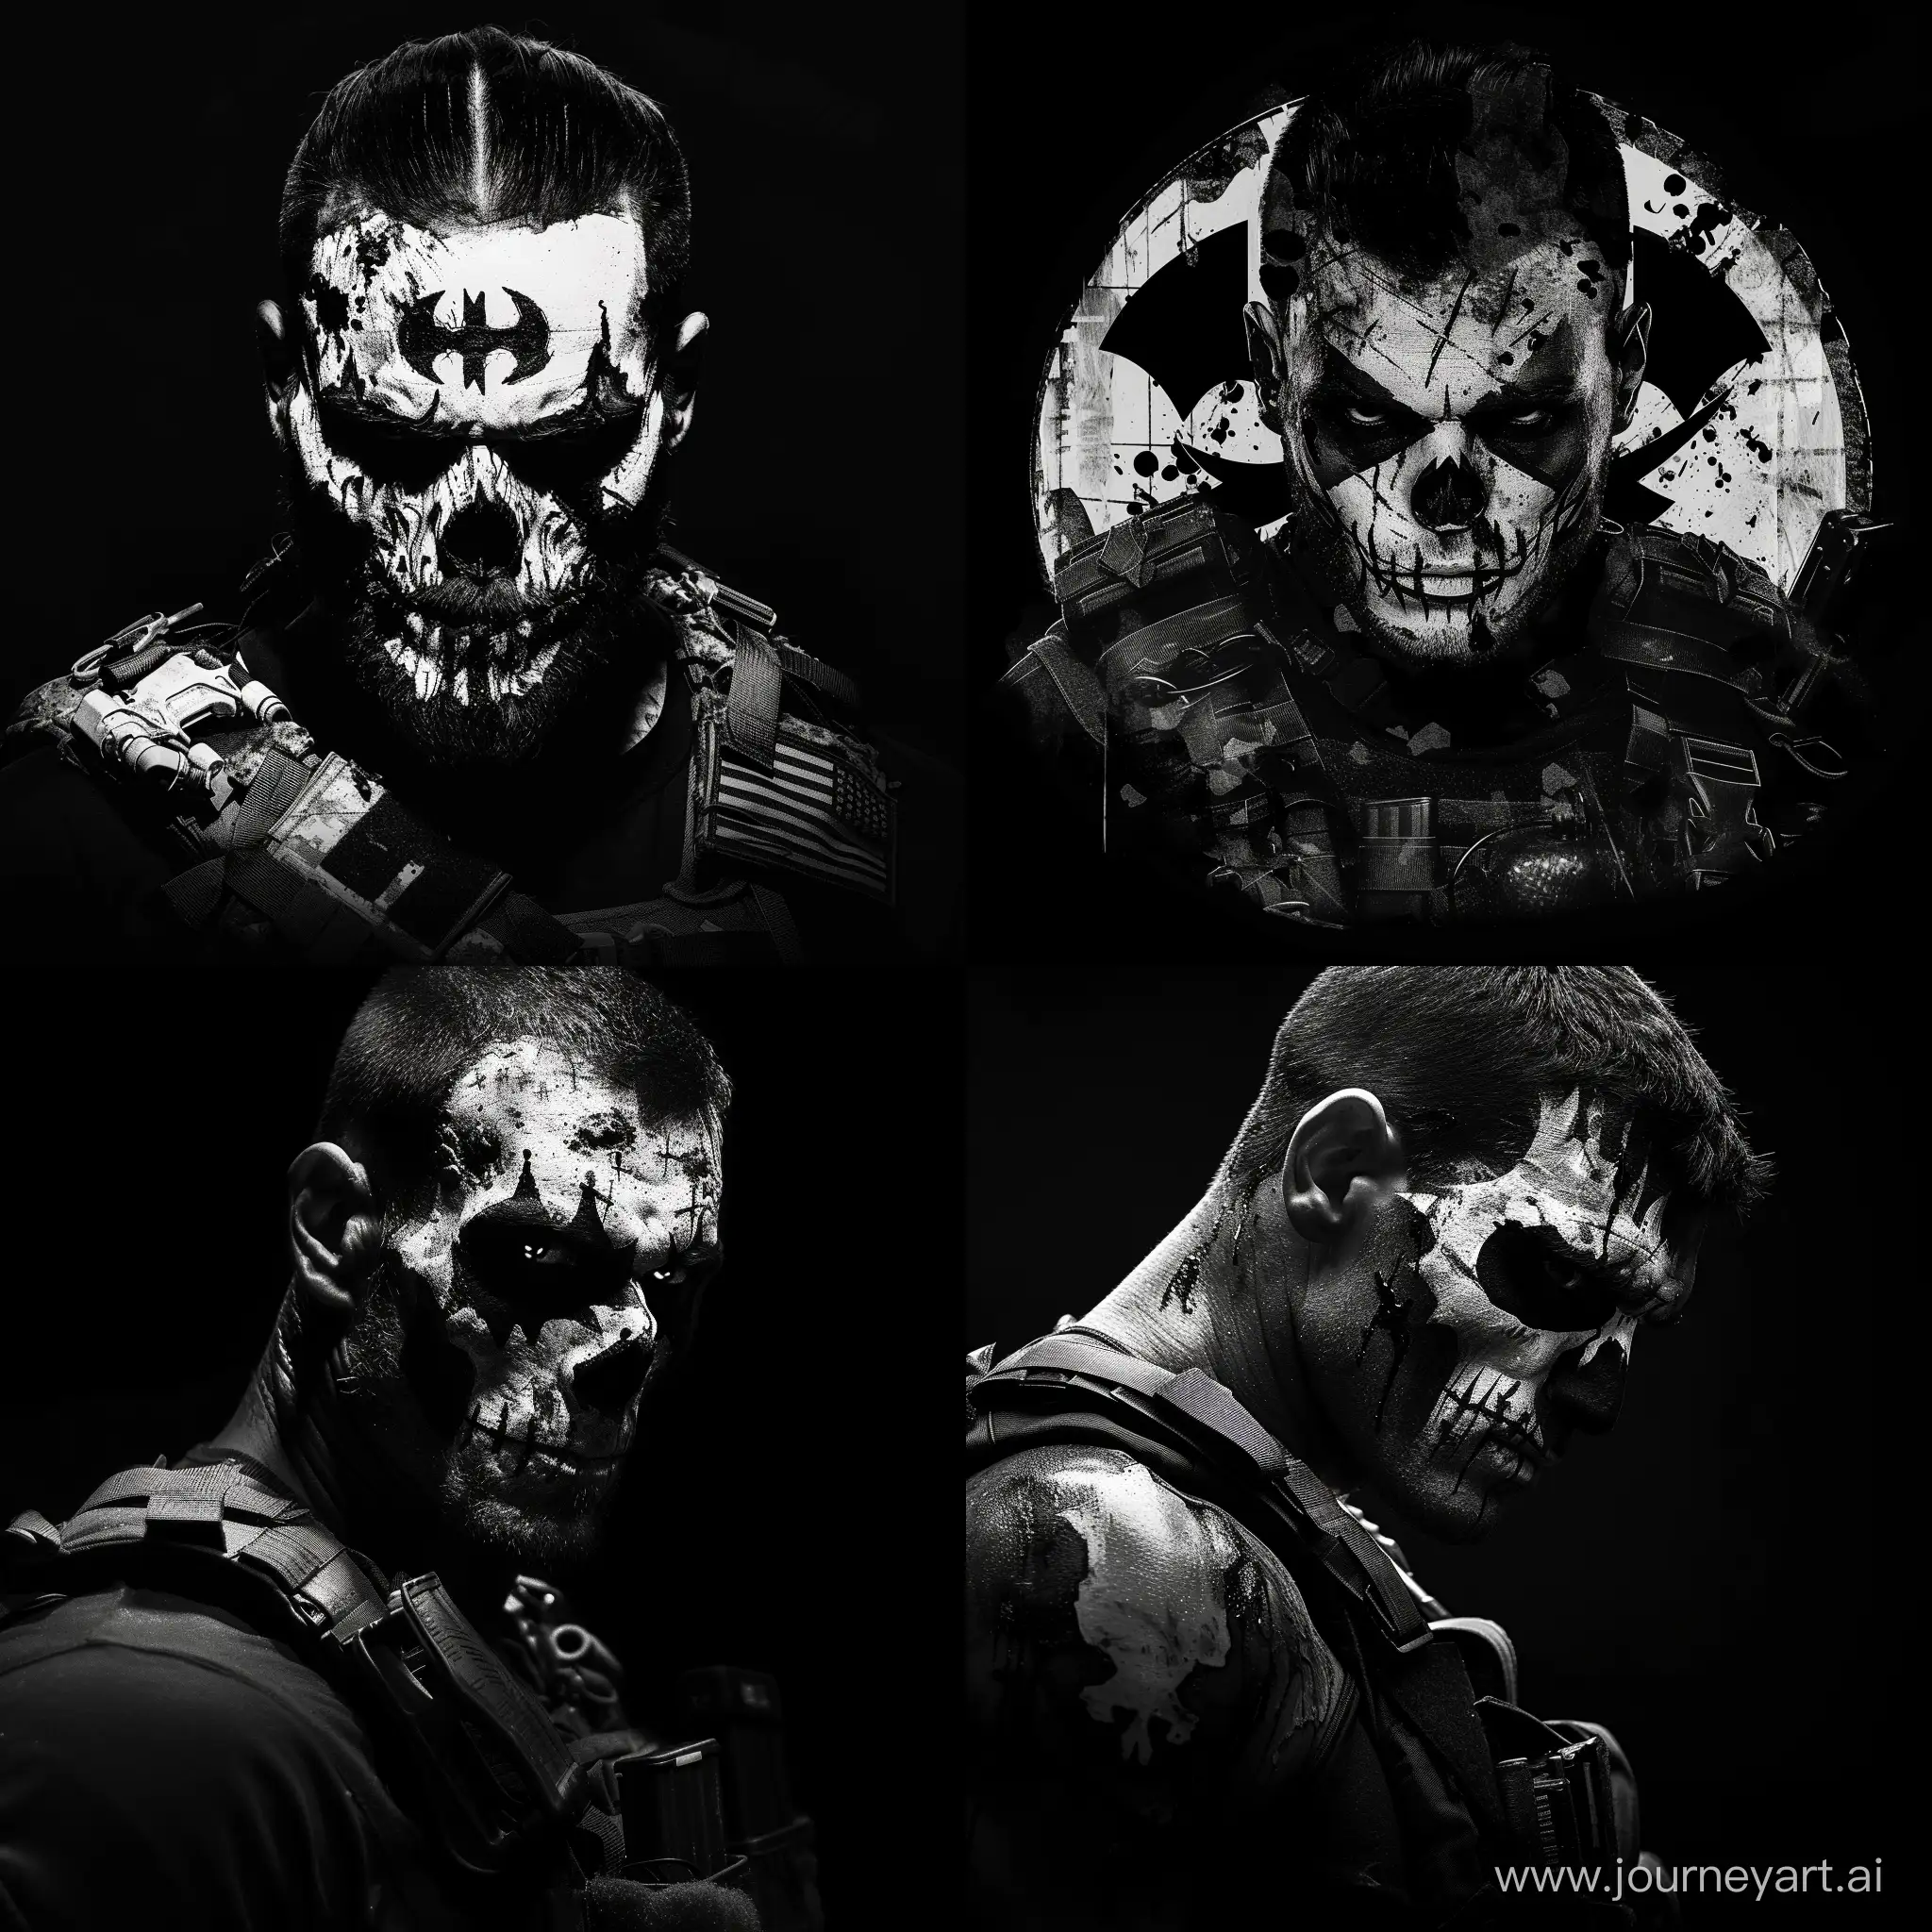 Military-Man-with-Punisher-War-Paint-Skull-on-Black-Background